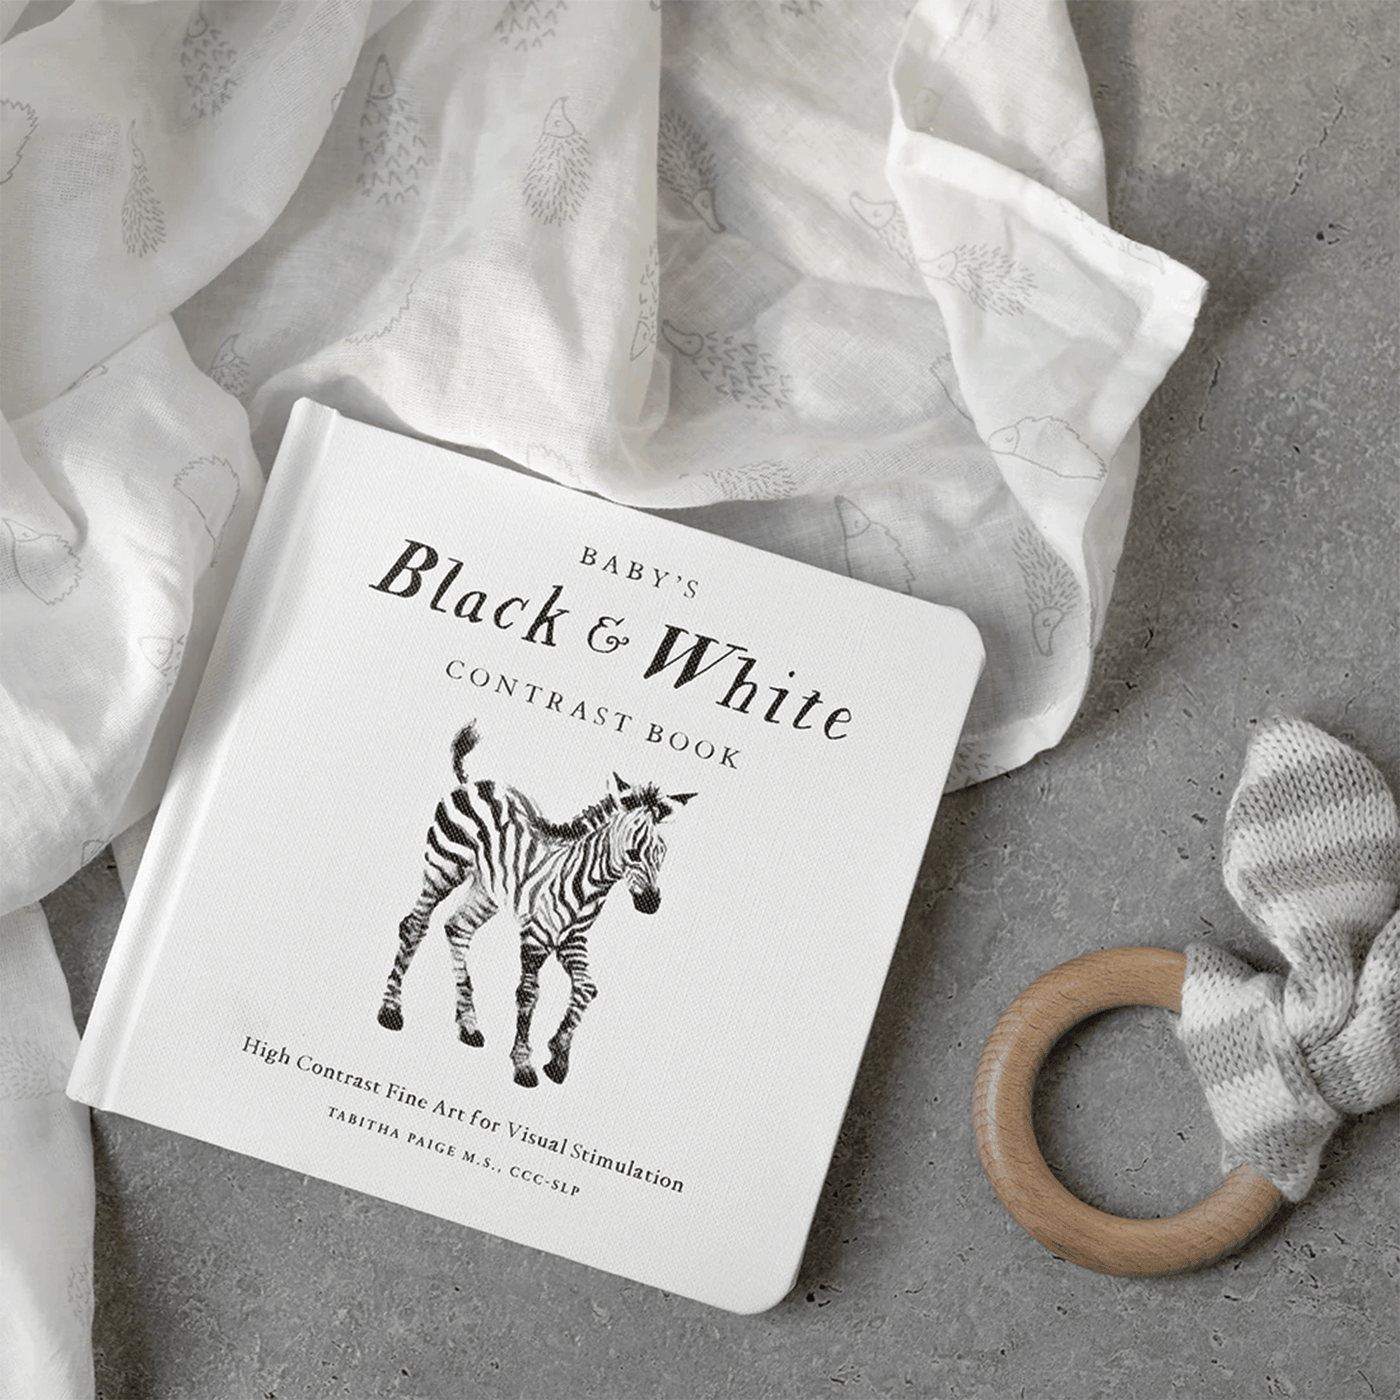 Tabitha Paige | Baby's Black and White Contrast Book